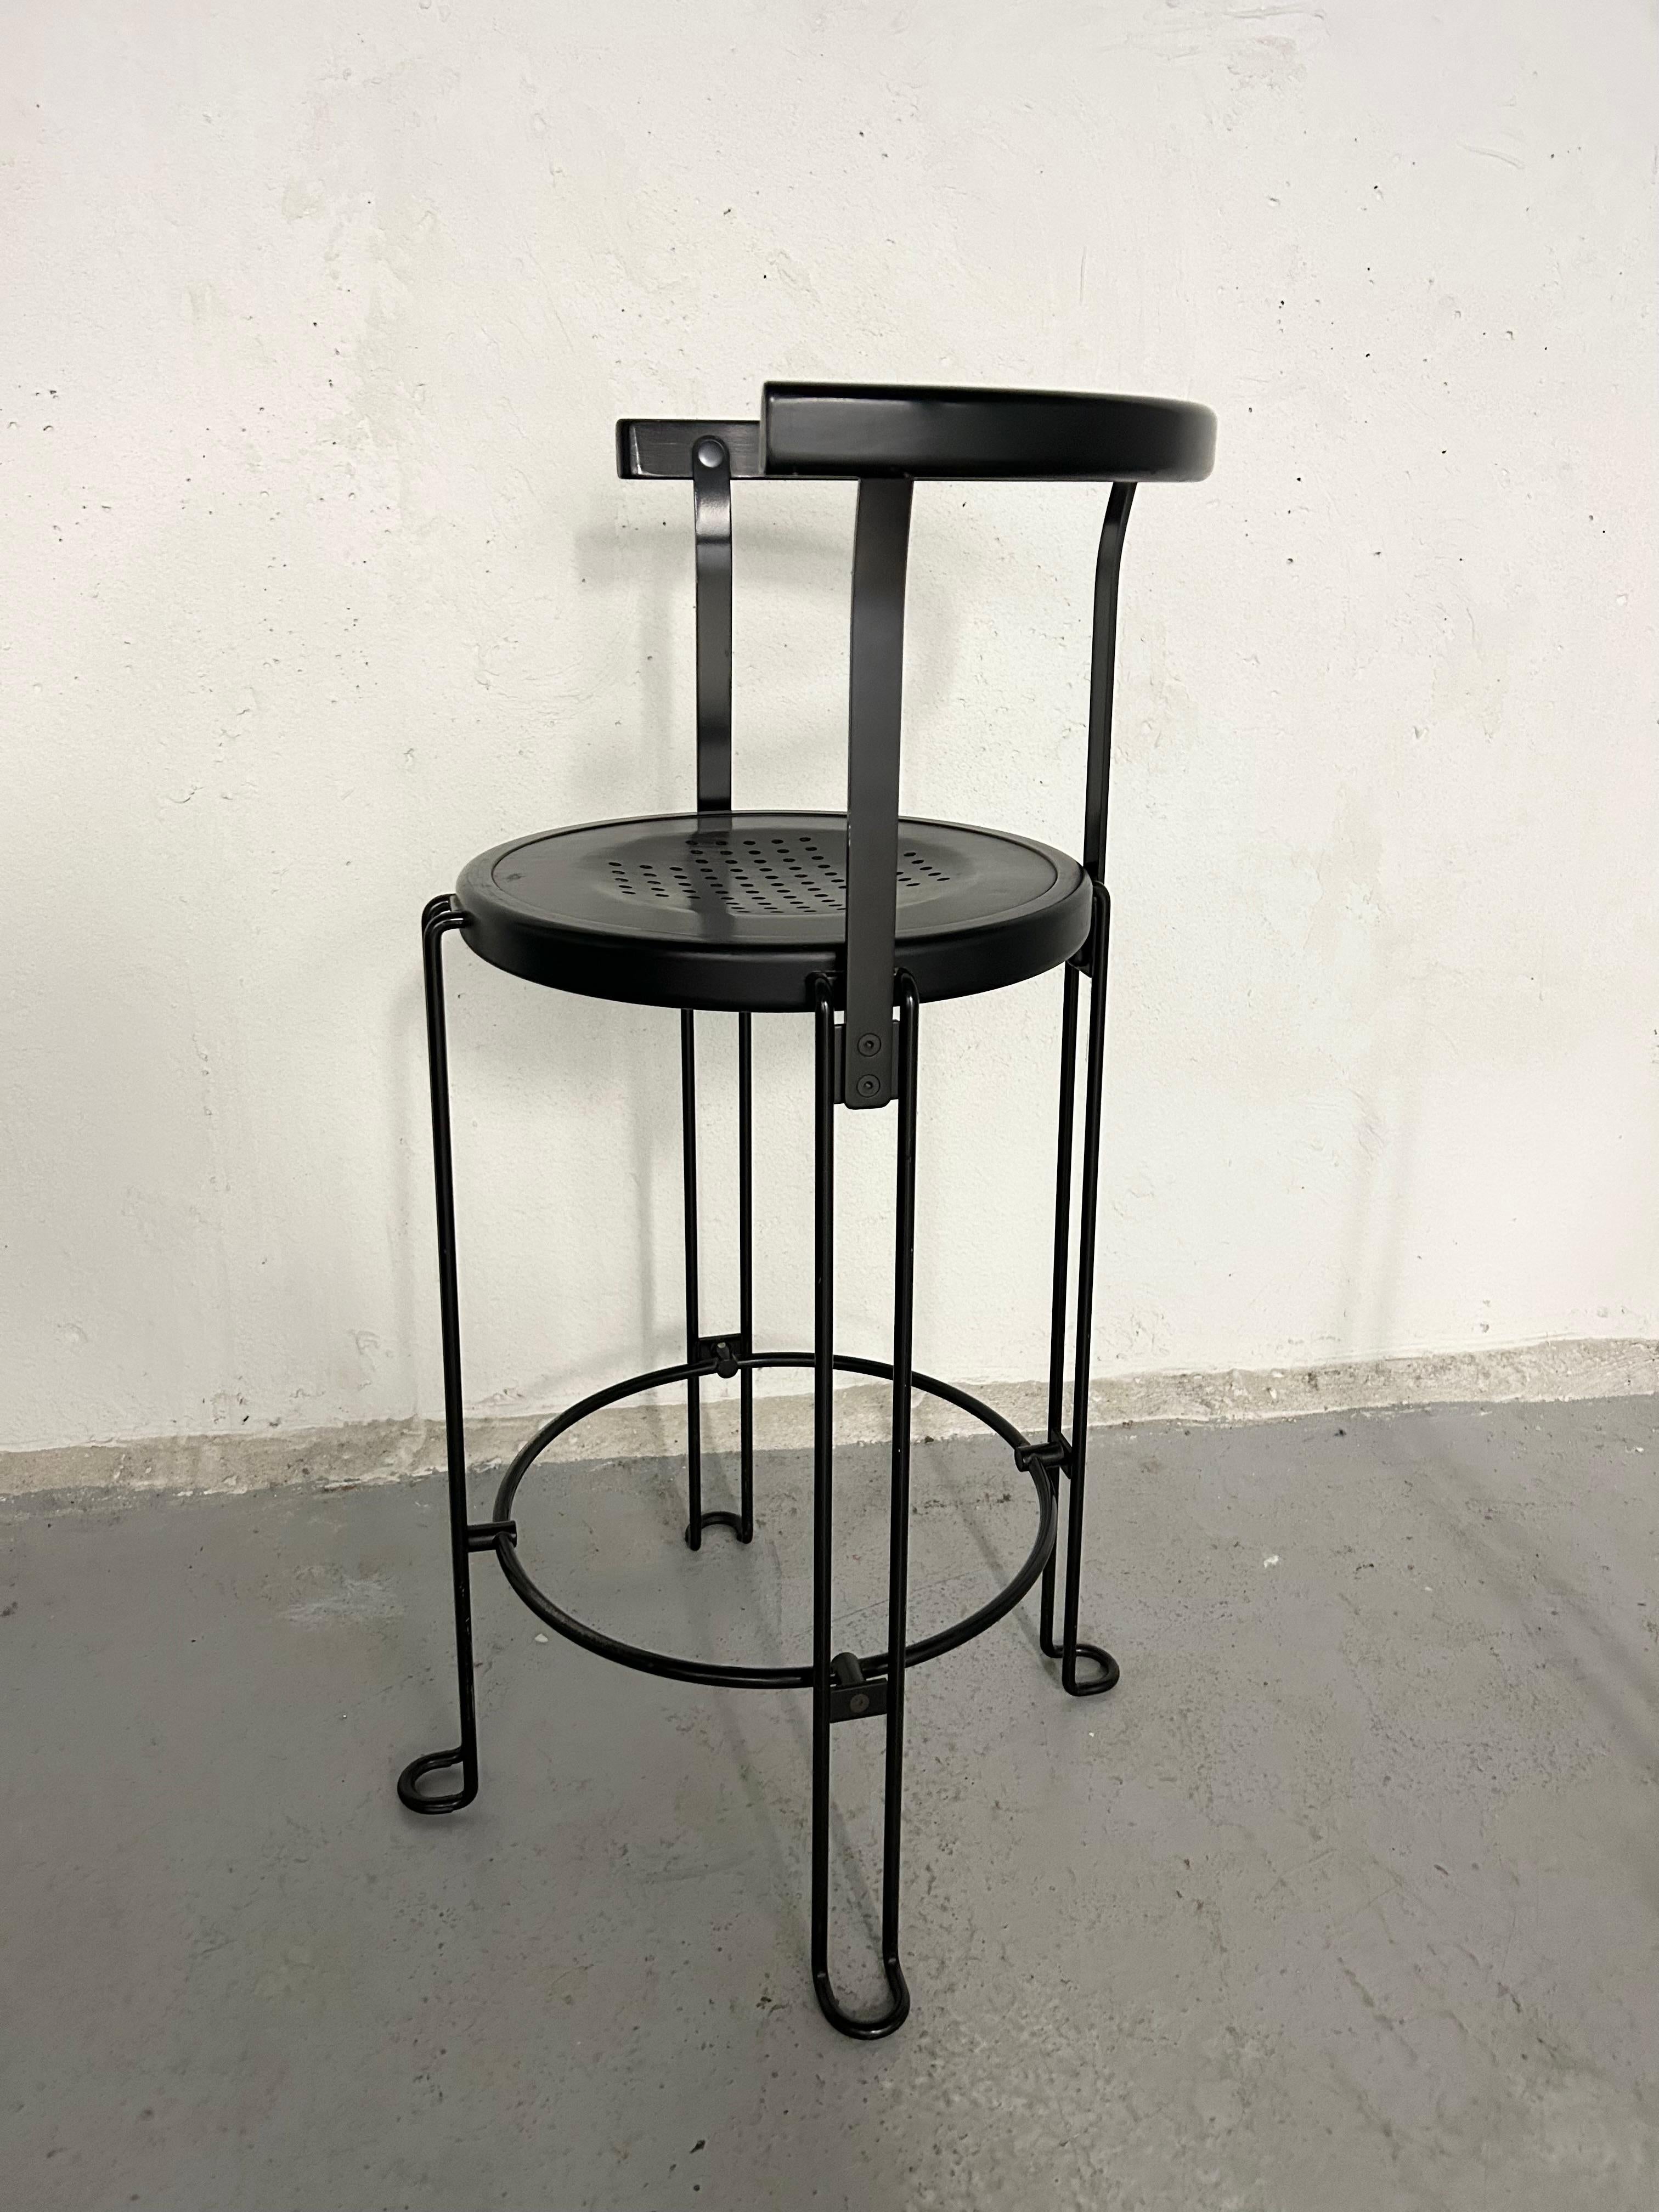 Borge Lindau for Bla Station Sweden, 1986.
B4-65 Counter Height Stool, from the Oblado Series. Industrial design of black lacquered steel and birch. Normal wear for age.